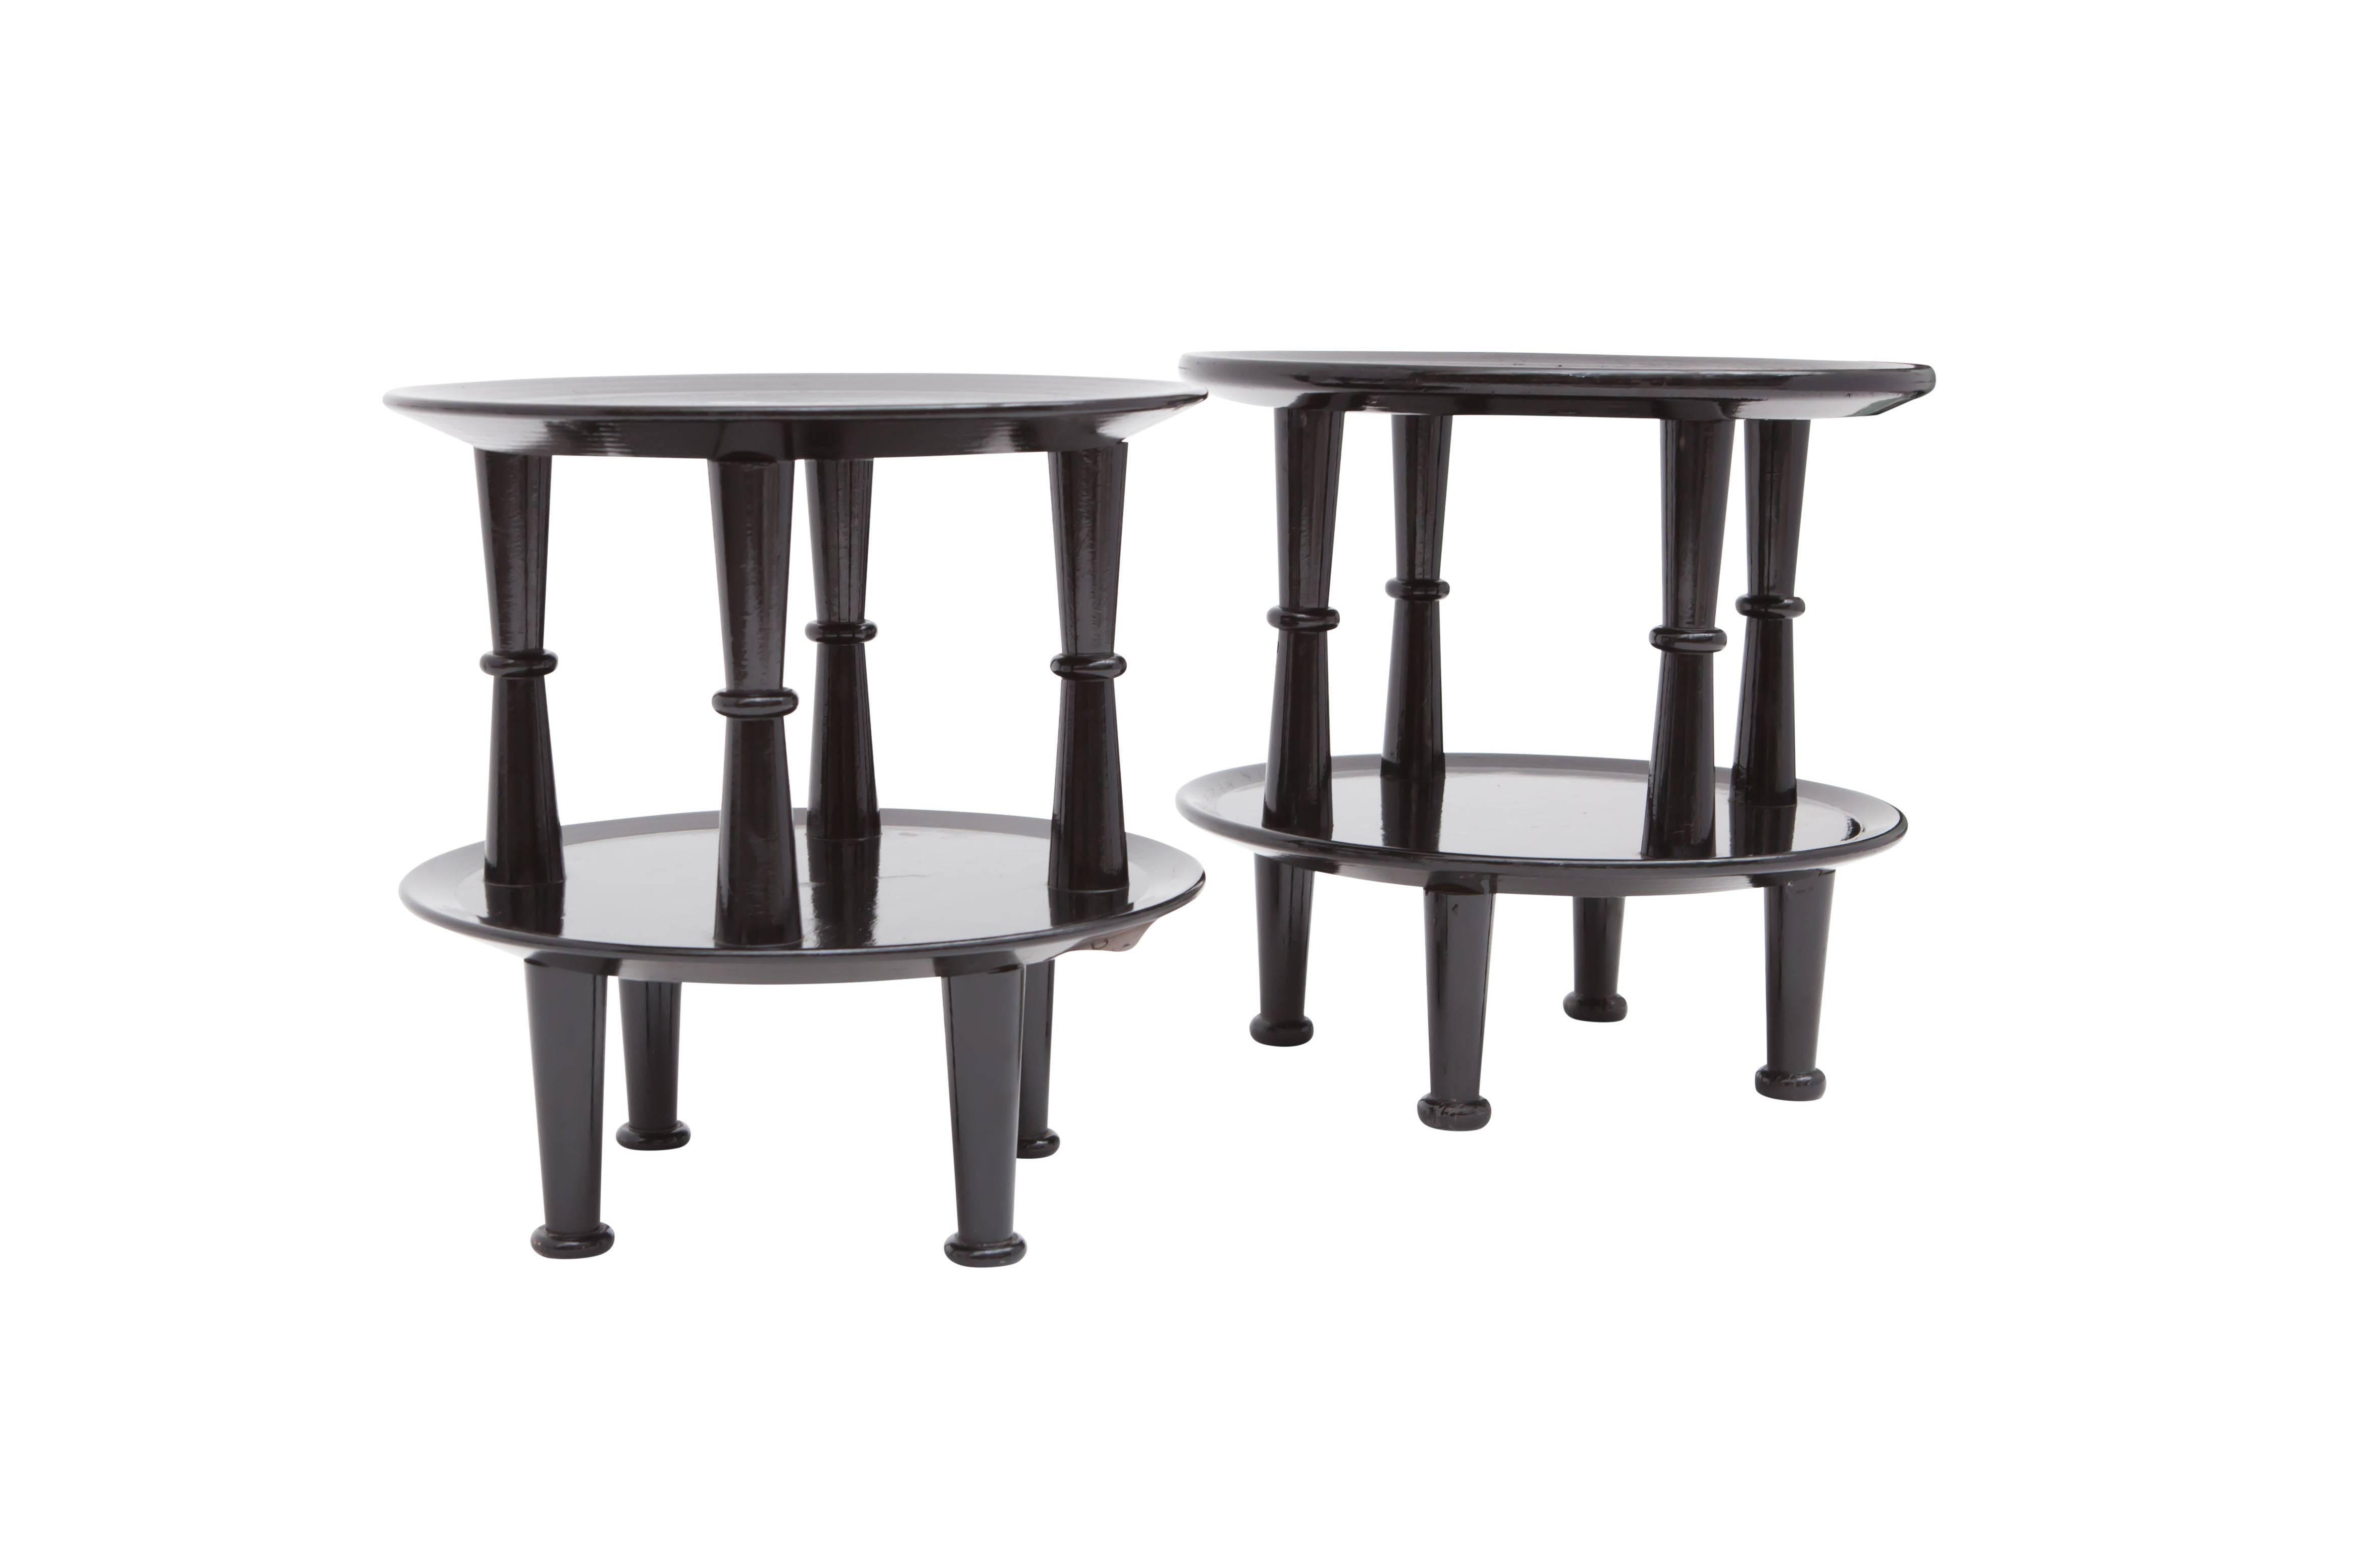 Art Deco side tables, black lacquered frame, France, 1940s

The side tables are not a identical which adds even more character and uniqueness.
     